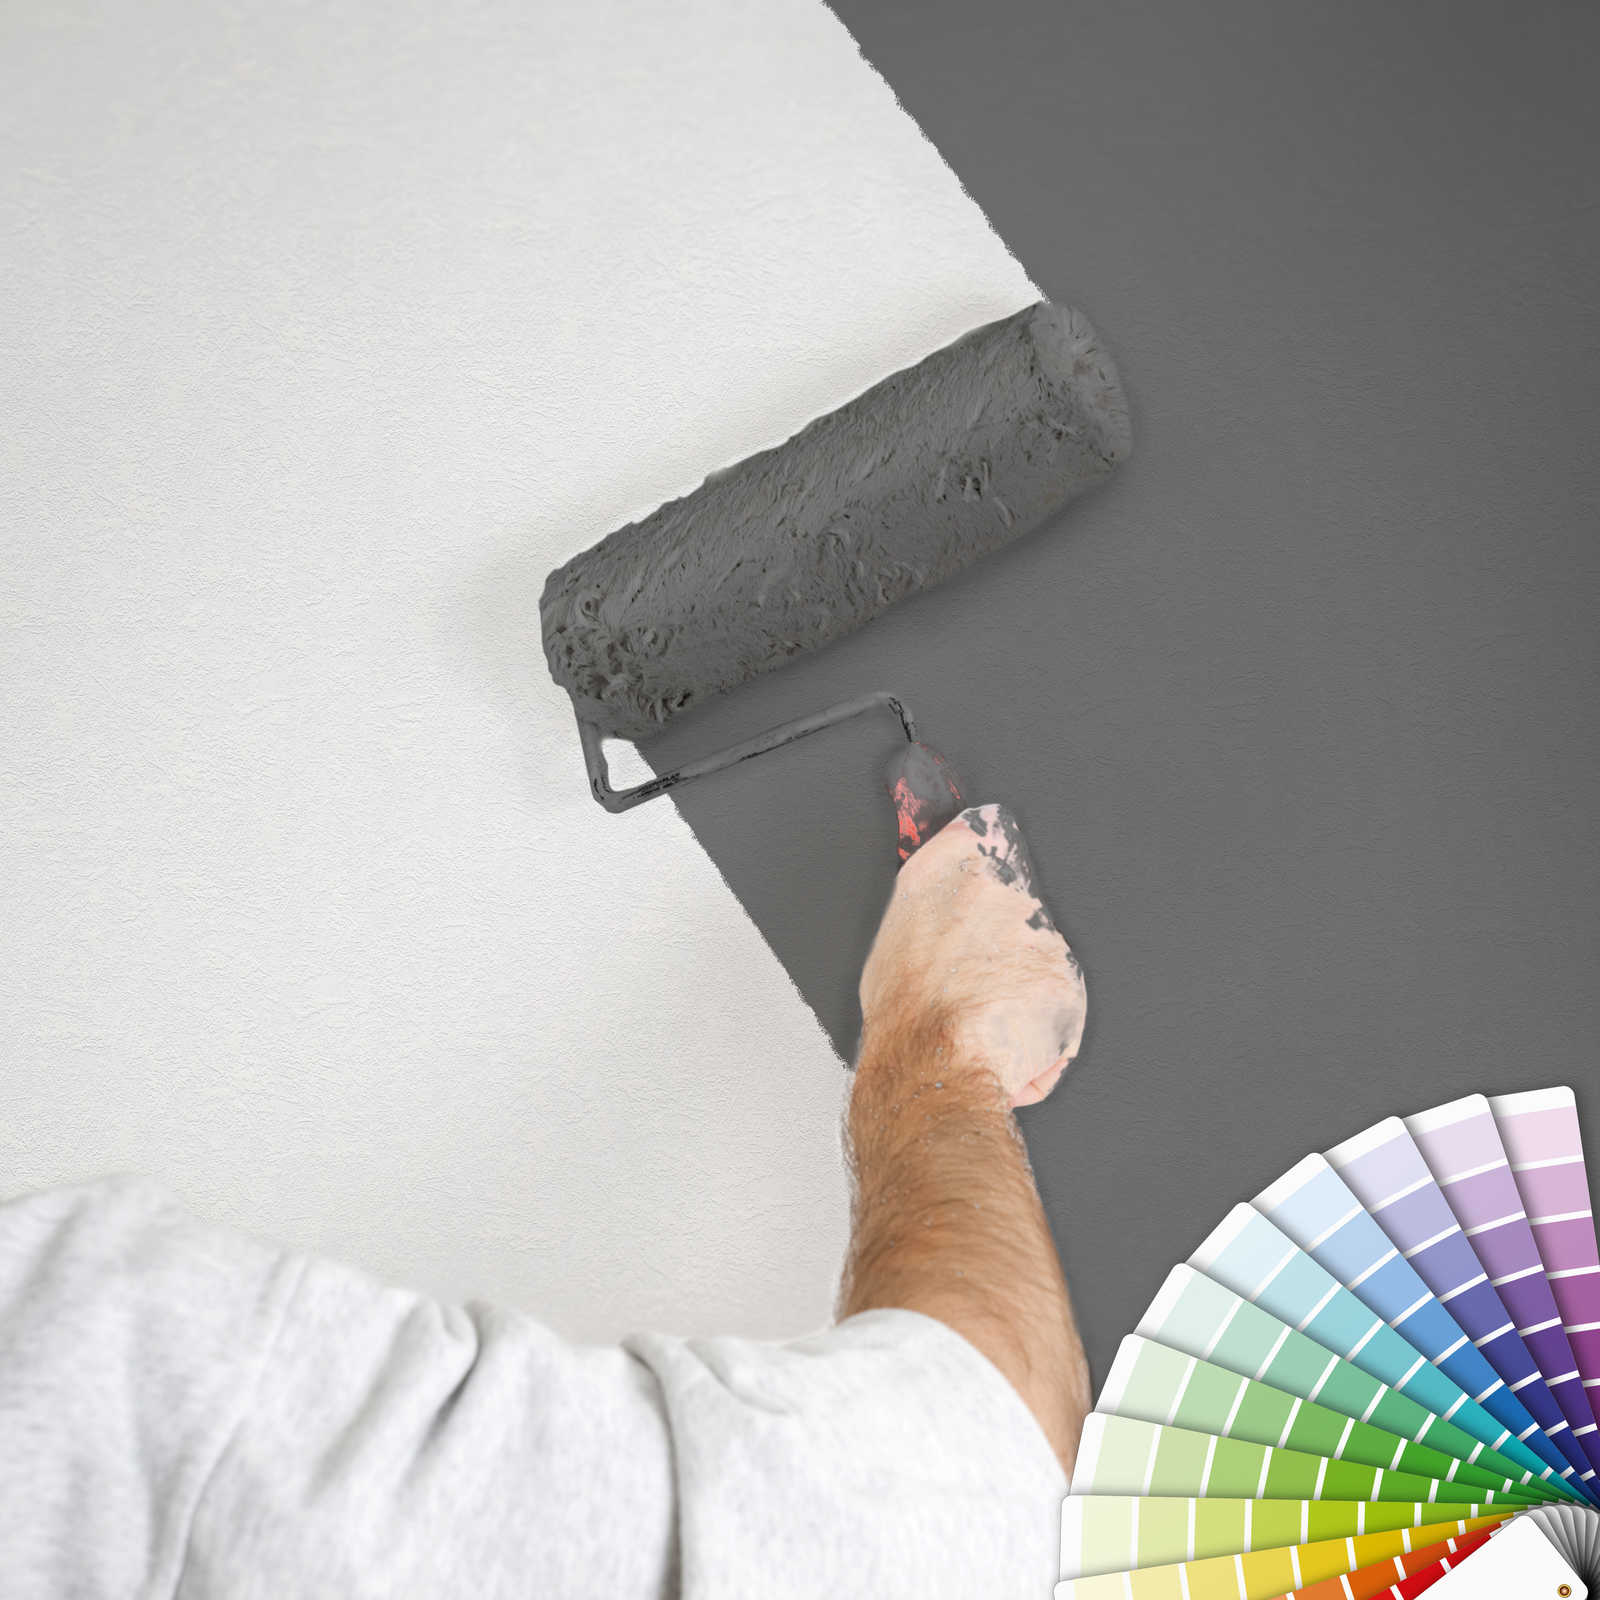             Paintable wallpaper with roughcast look for colour effects
        